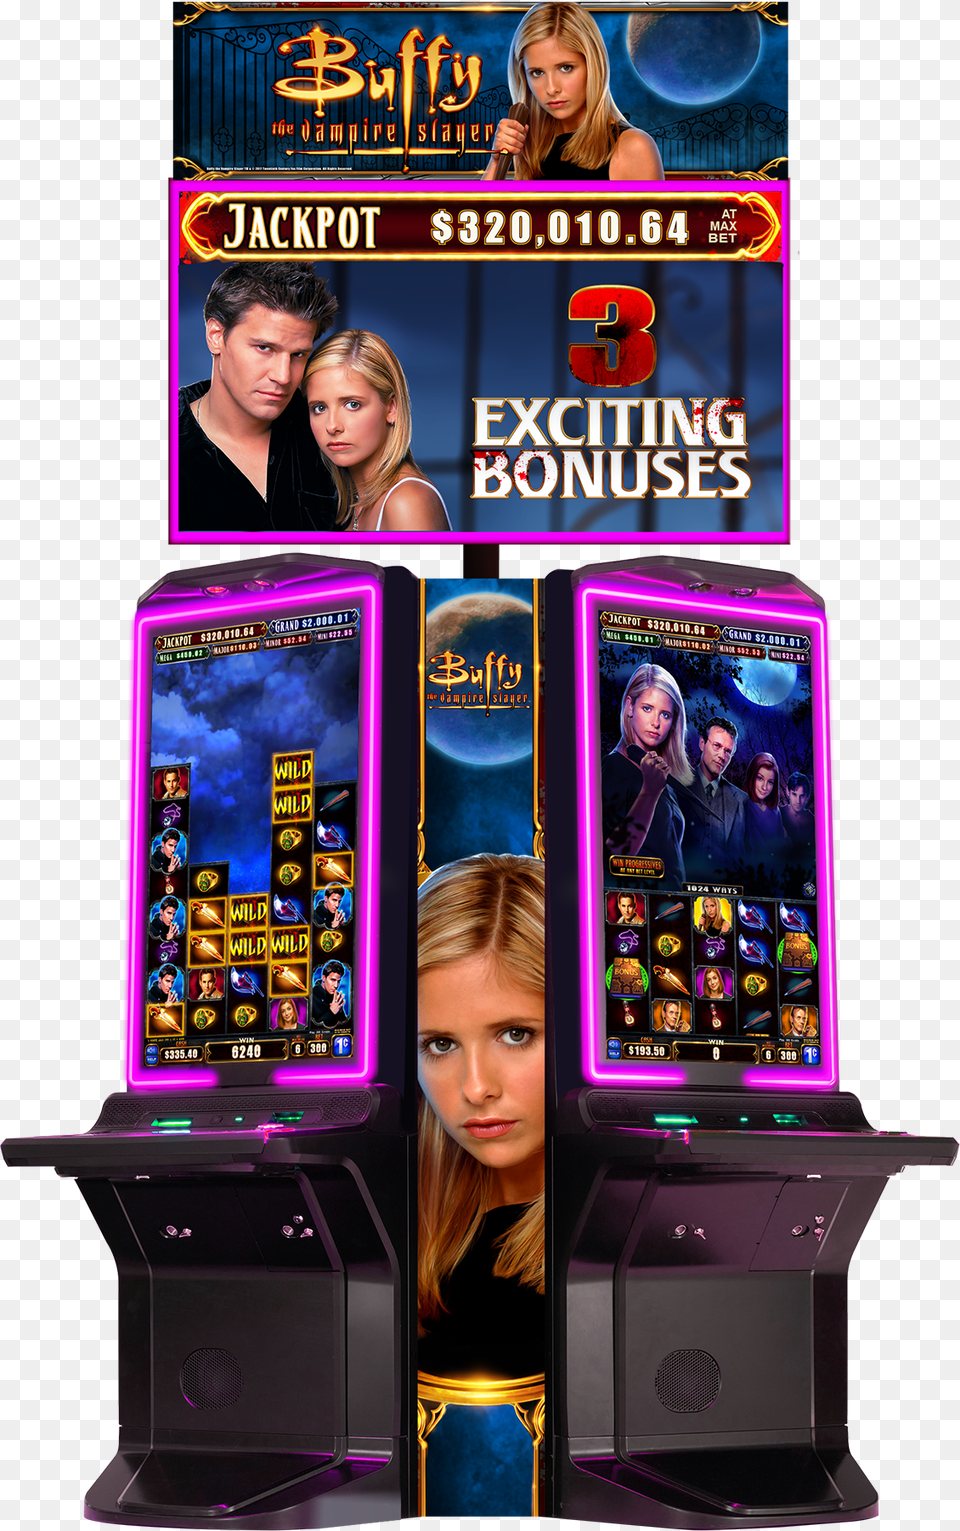 Vampires And Bonuses Are Ripe For The Picking On The Buffy The Vampire Slayer Slot Machine Vegas, Adult, Female, Male, Man Png